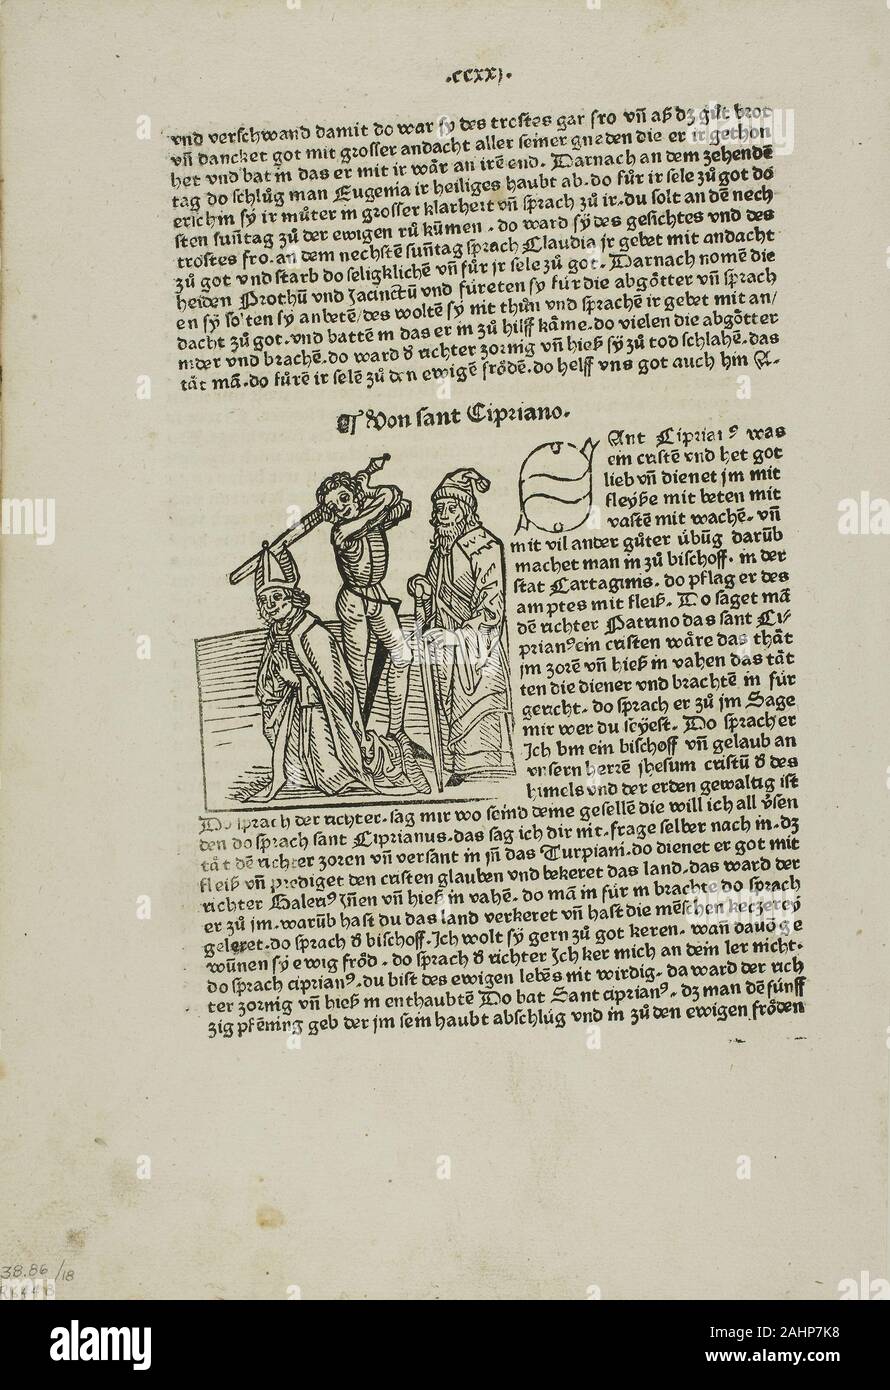 Master of the Boccaccio Illustrations. Martyrdom of Saint Cipriano from Heiligenleben (Lives of the Saints), Plate 18 from Woodcuts from Books of the 15th Century. 1481. Netherlandish. Woodcut in black, and letterpress in black (recto and verso), on cream laid paper This simple woodcut book illustration, from an early printed edition of Jacobus de Voragine’s famous Lives of the Saints, depicts the martyrdom of the now little-known Saint Cipriano. This theologian quickly rose in the ranks of the Church, becoming bishop of Carthage in A.D. 248. After serving for a decade, Cipriano fled and survi Stock Photo